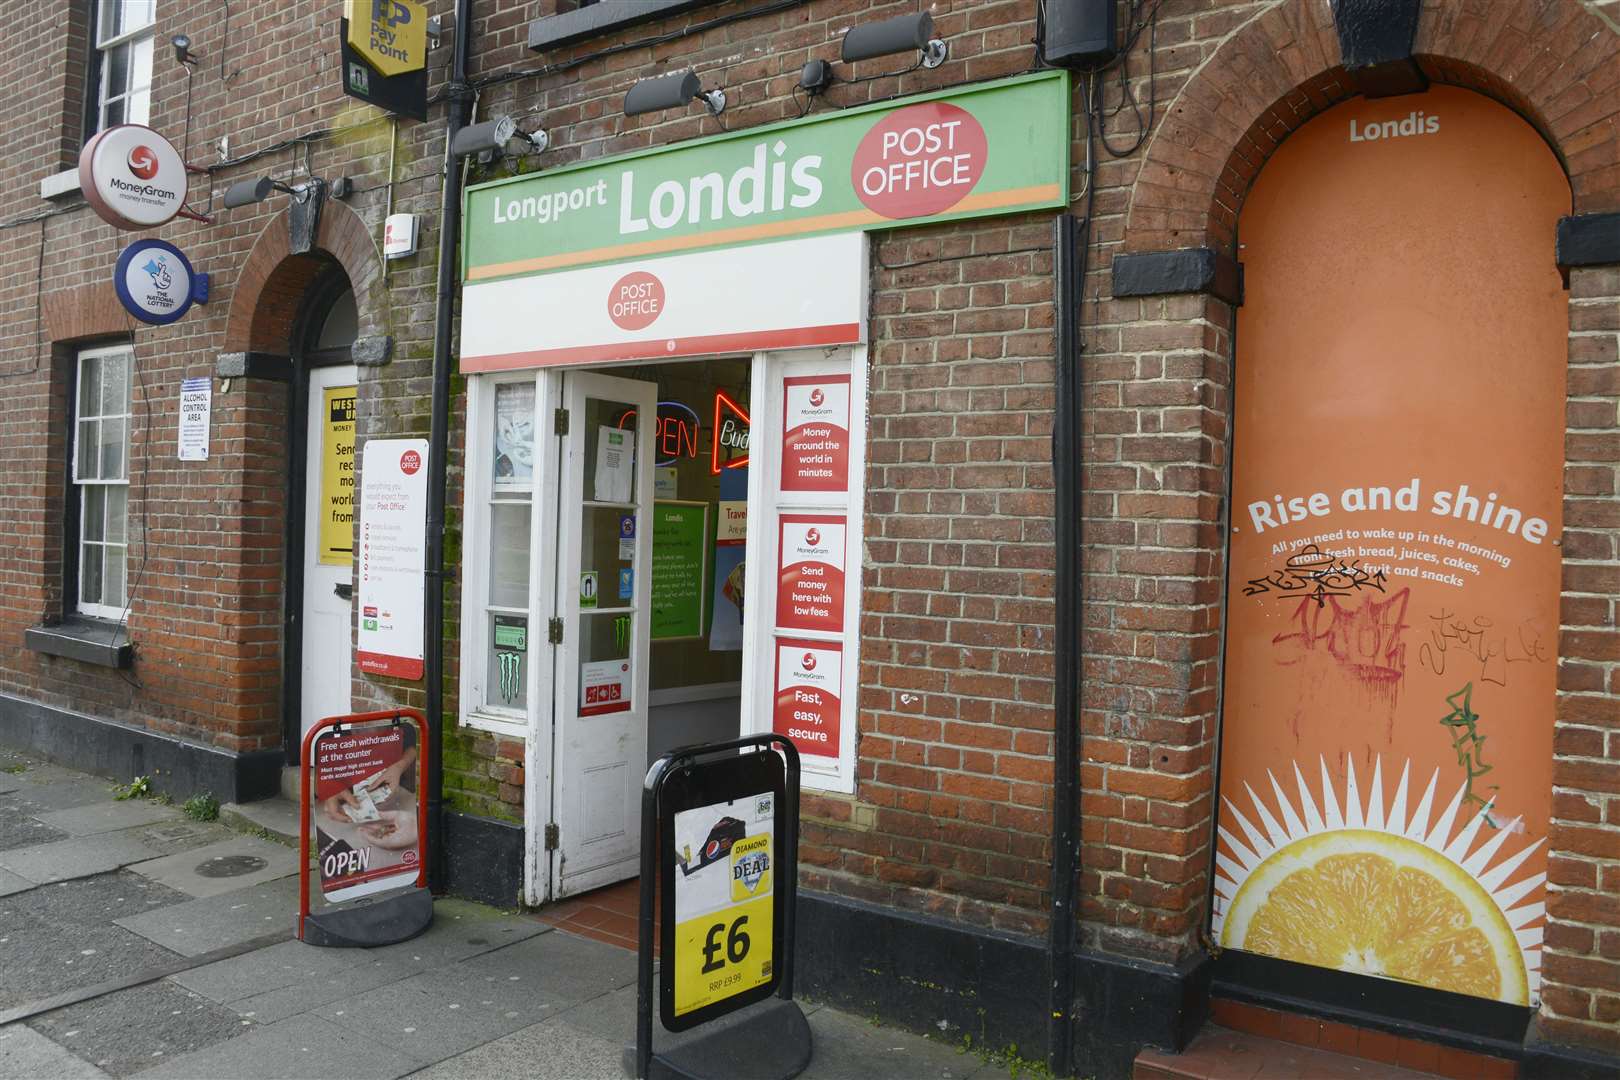 Canterbury Longport Londis Post Office. Picture: Paul Amos